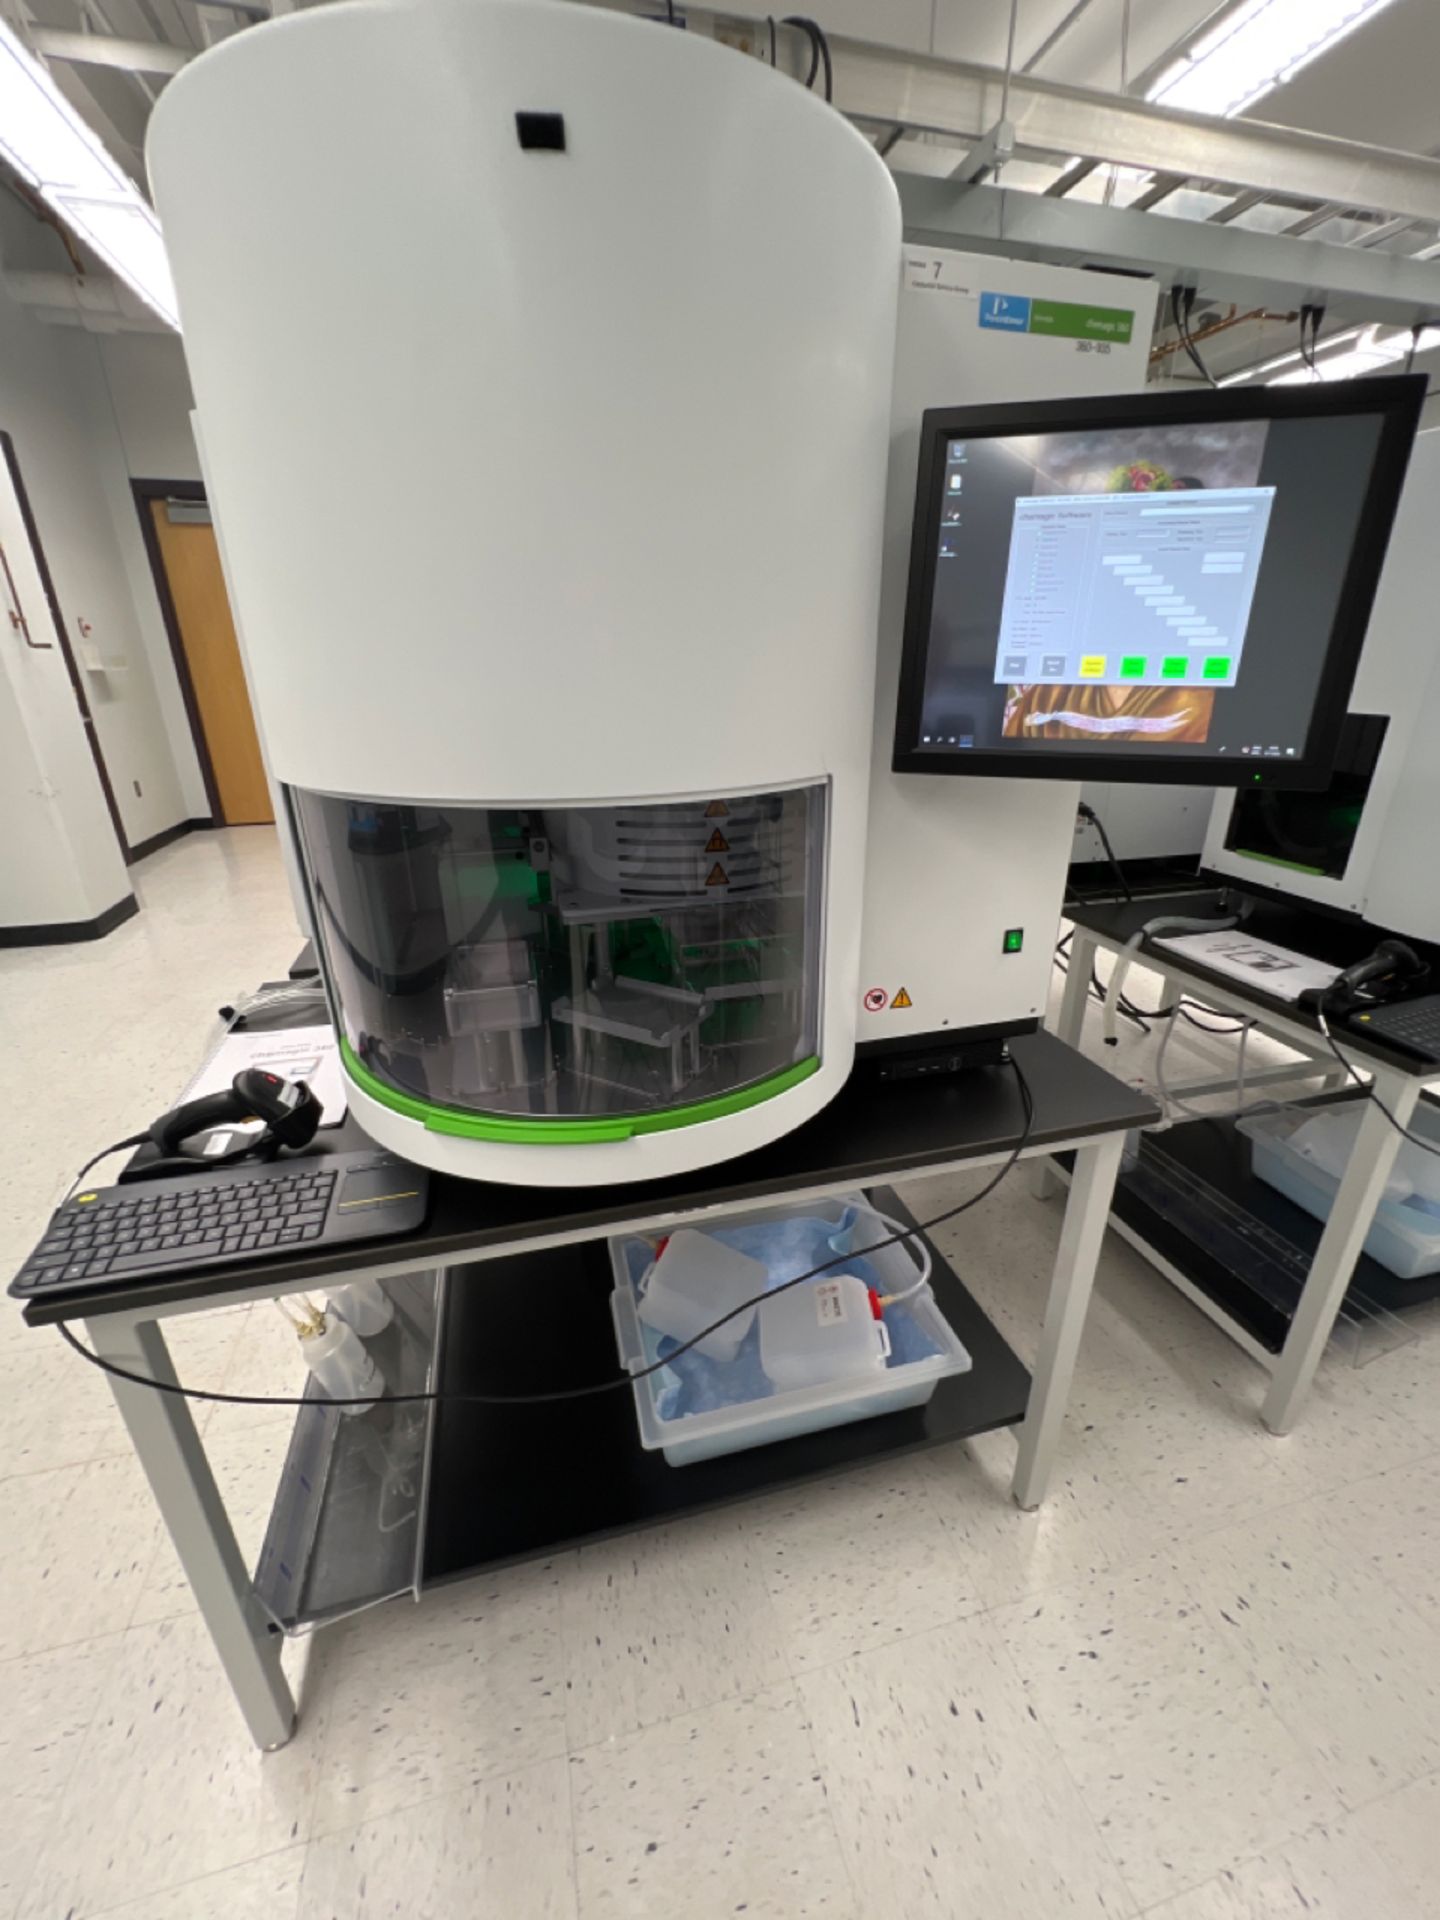 PERKINELMER CHEMAGIC 360 NUCLEIC ACID EXTRACTOR AUG-2020 SOFTWARE 6.3.0.3 2024-0020 20240935 TABLE